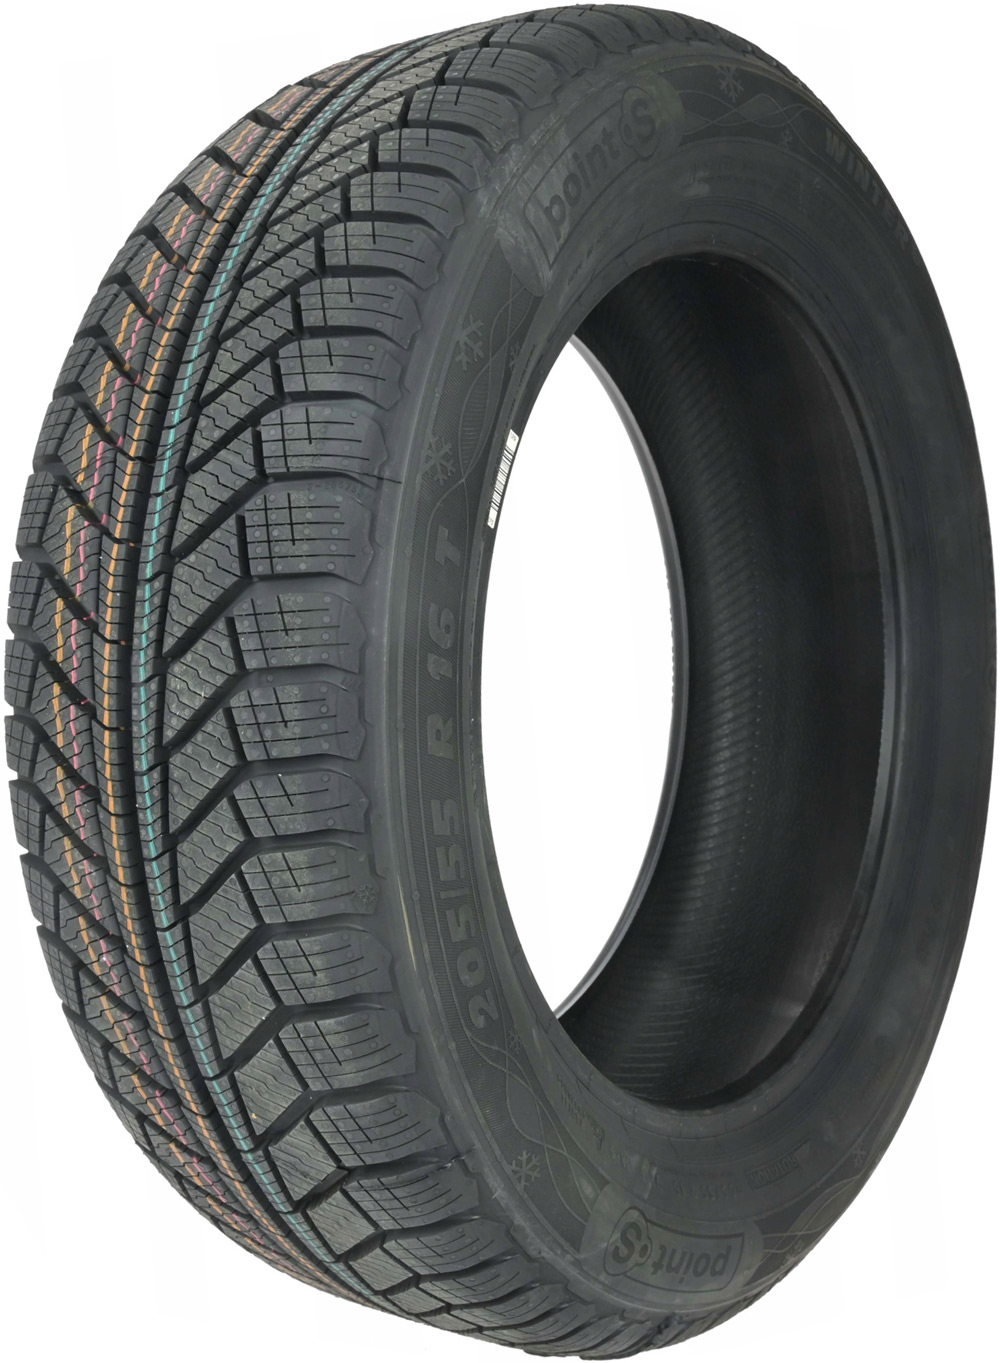 Anvelope auto POINT S WINTER S 205/55 R16 91H